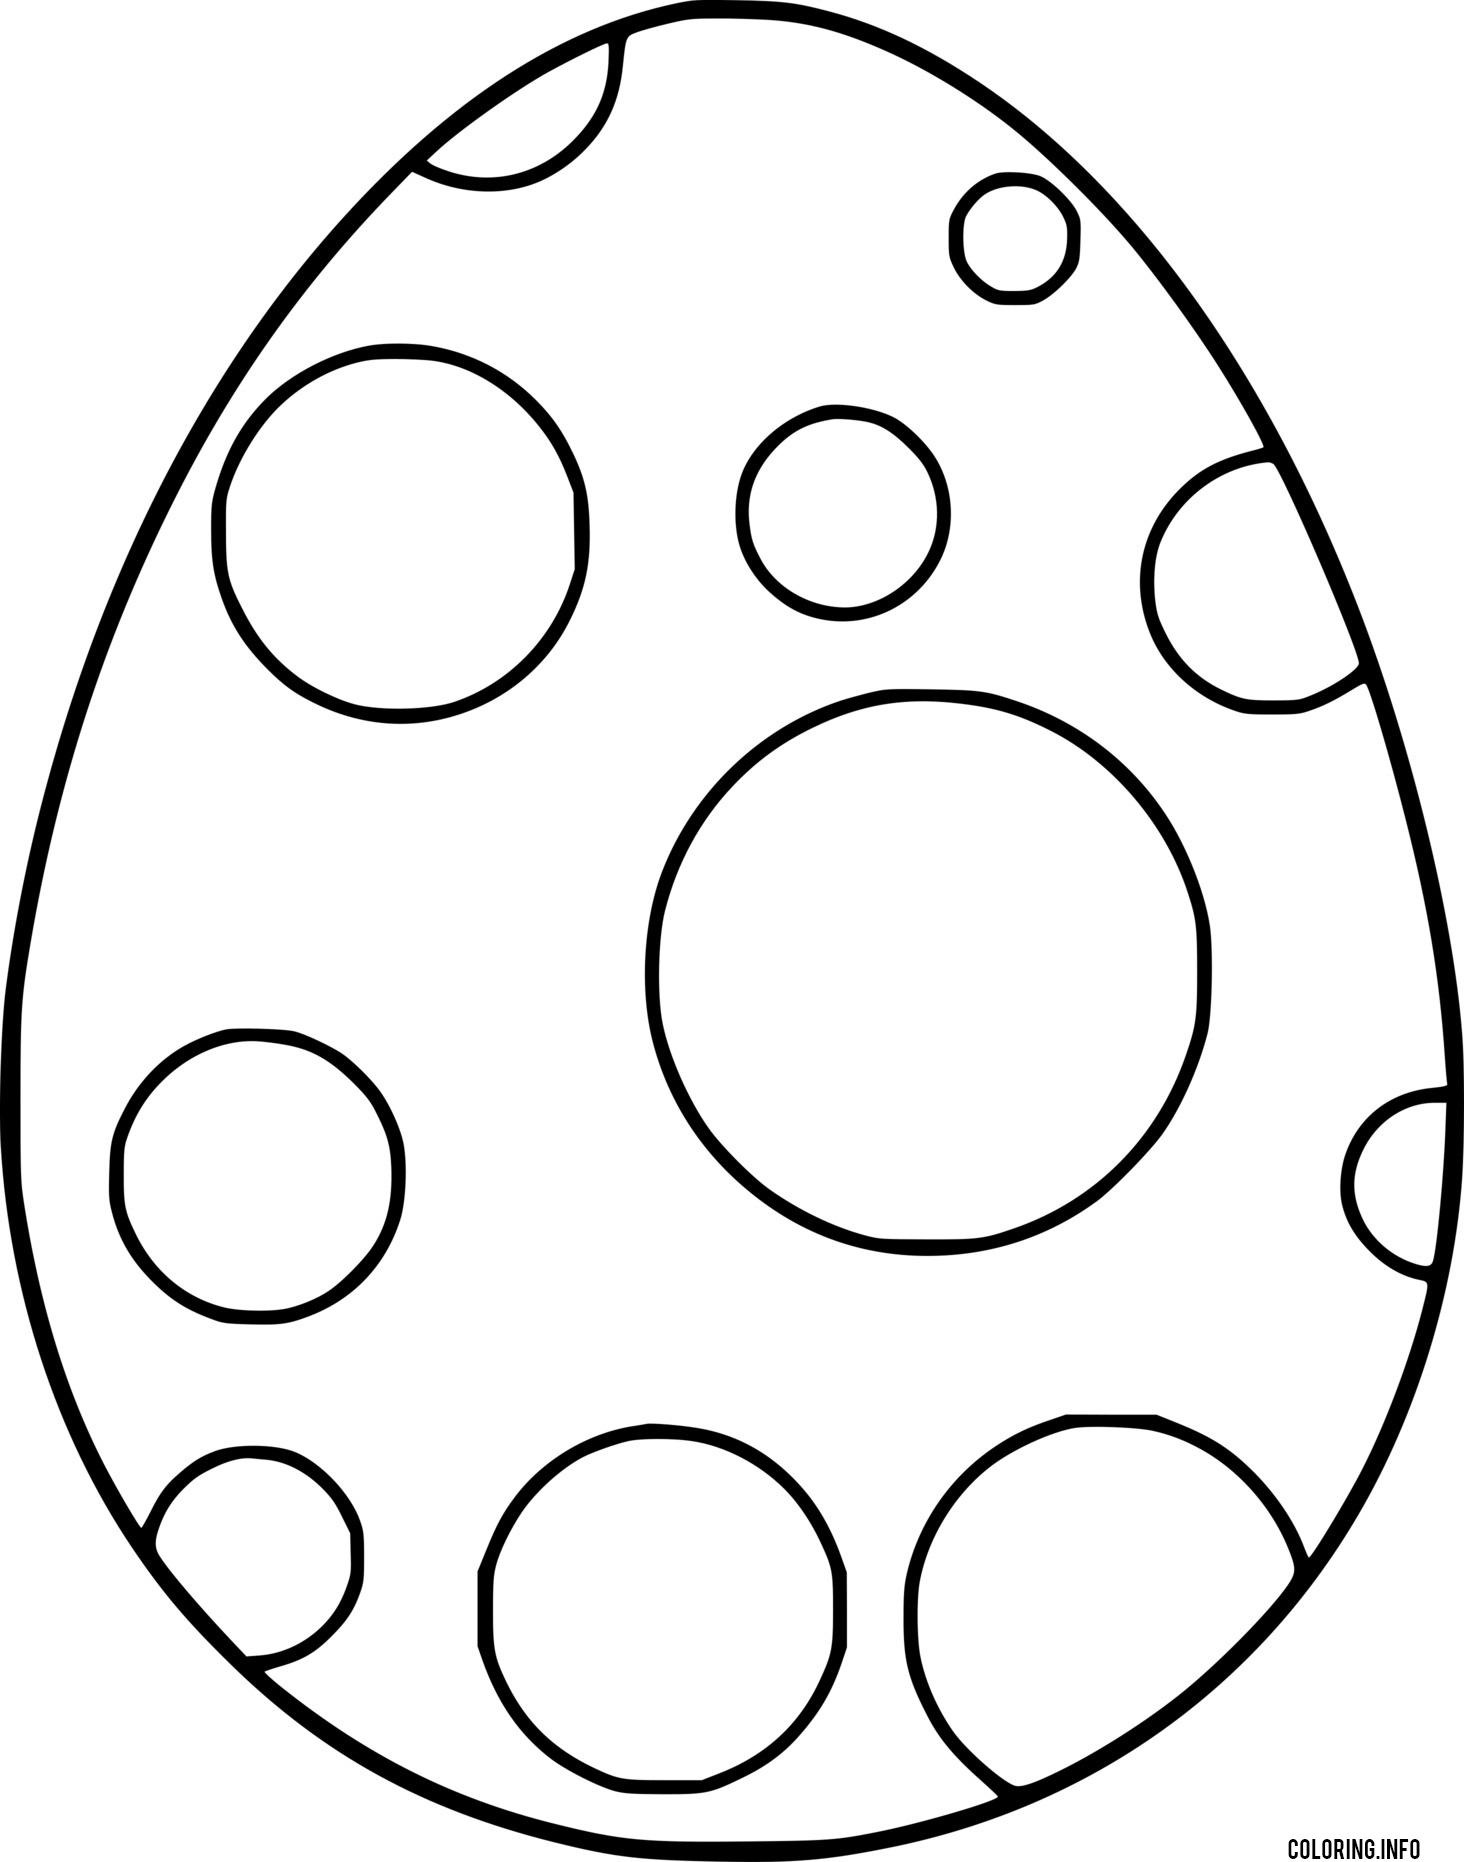 Easter Egg With Circle Patterns coloring